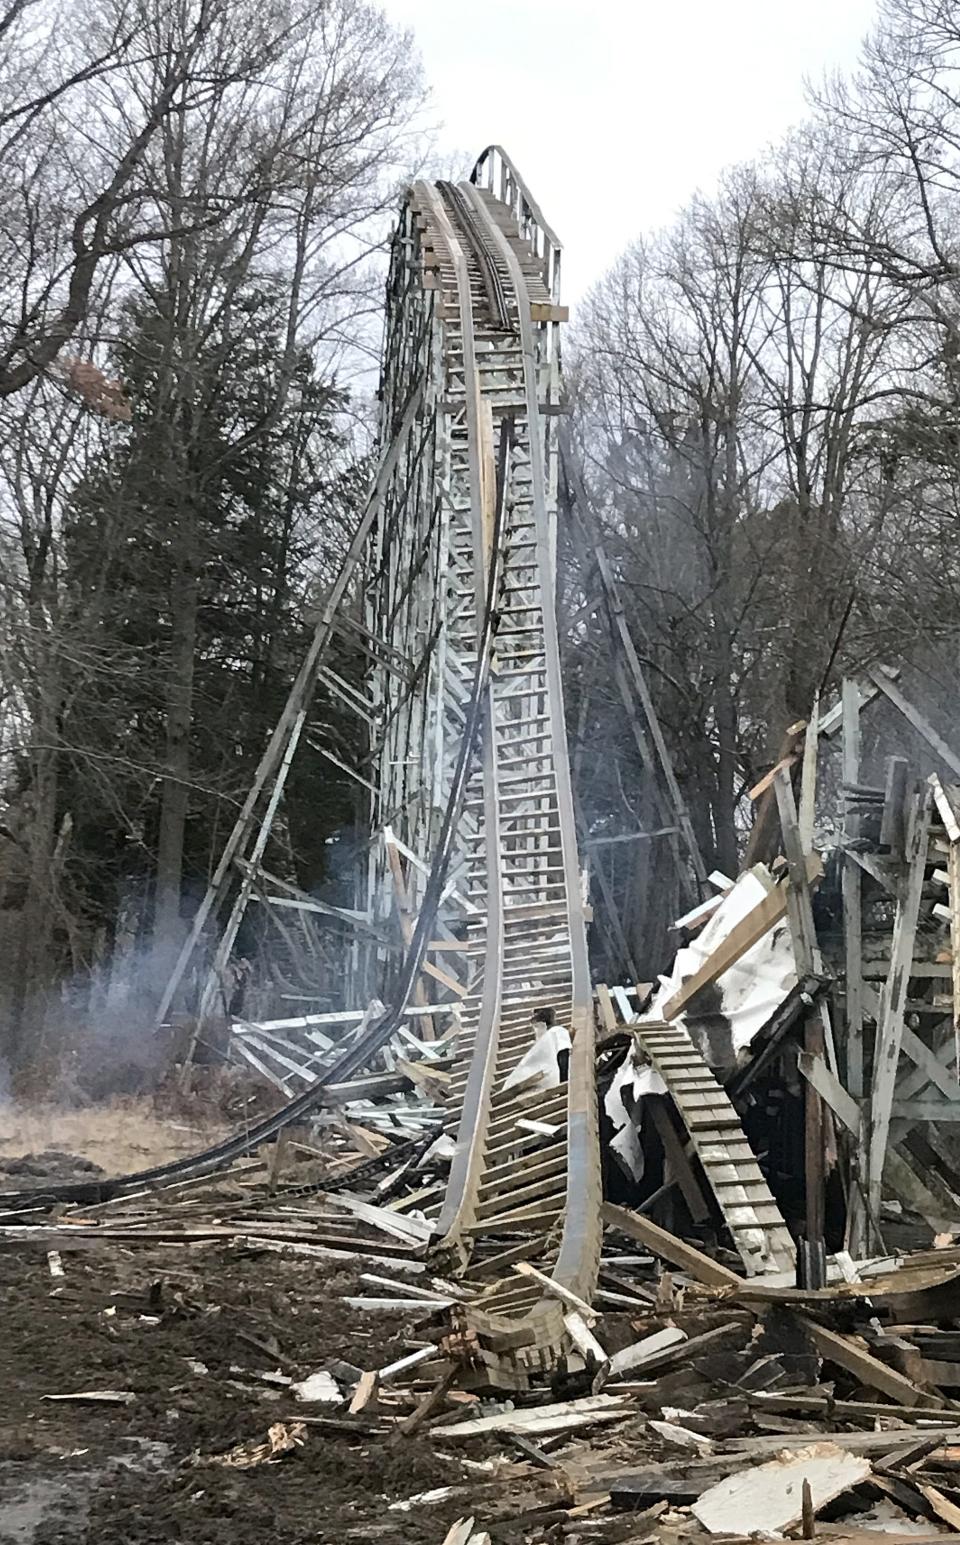 The first hill of the Blue Streak roller coaster at Conneaut Lake Park in Summit Township, Crawford County, is shown on Jan. 5, 2022, one day after a fire heavily damaged the coaster station, where patrons boarded the ride. The park's owners hope to build full-servce campsites where the Blue Streak and other rides were located.